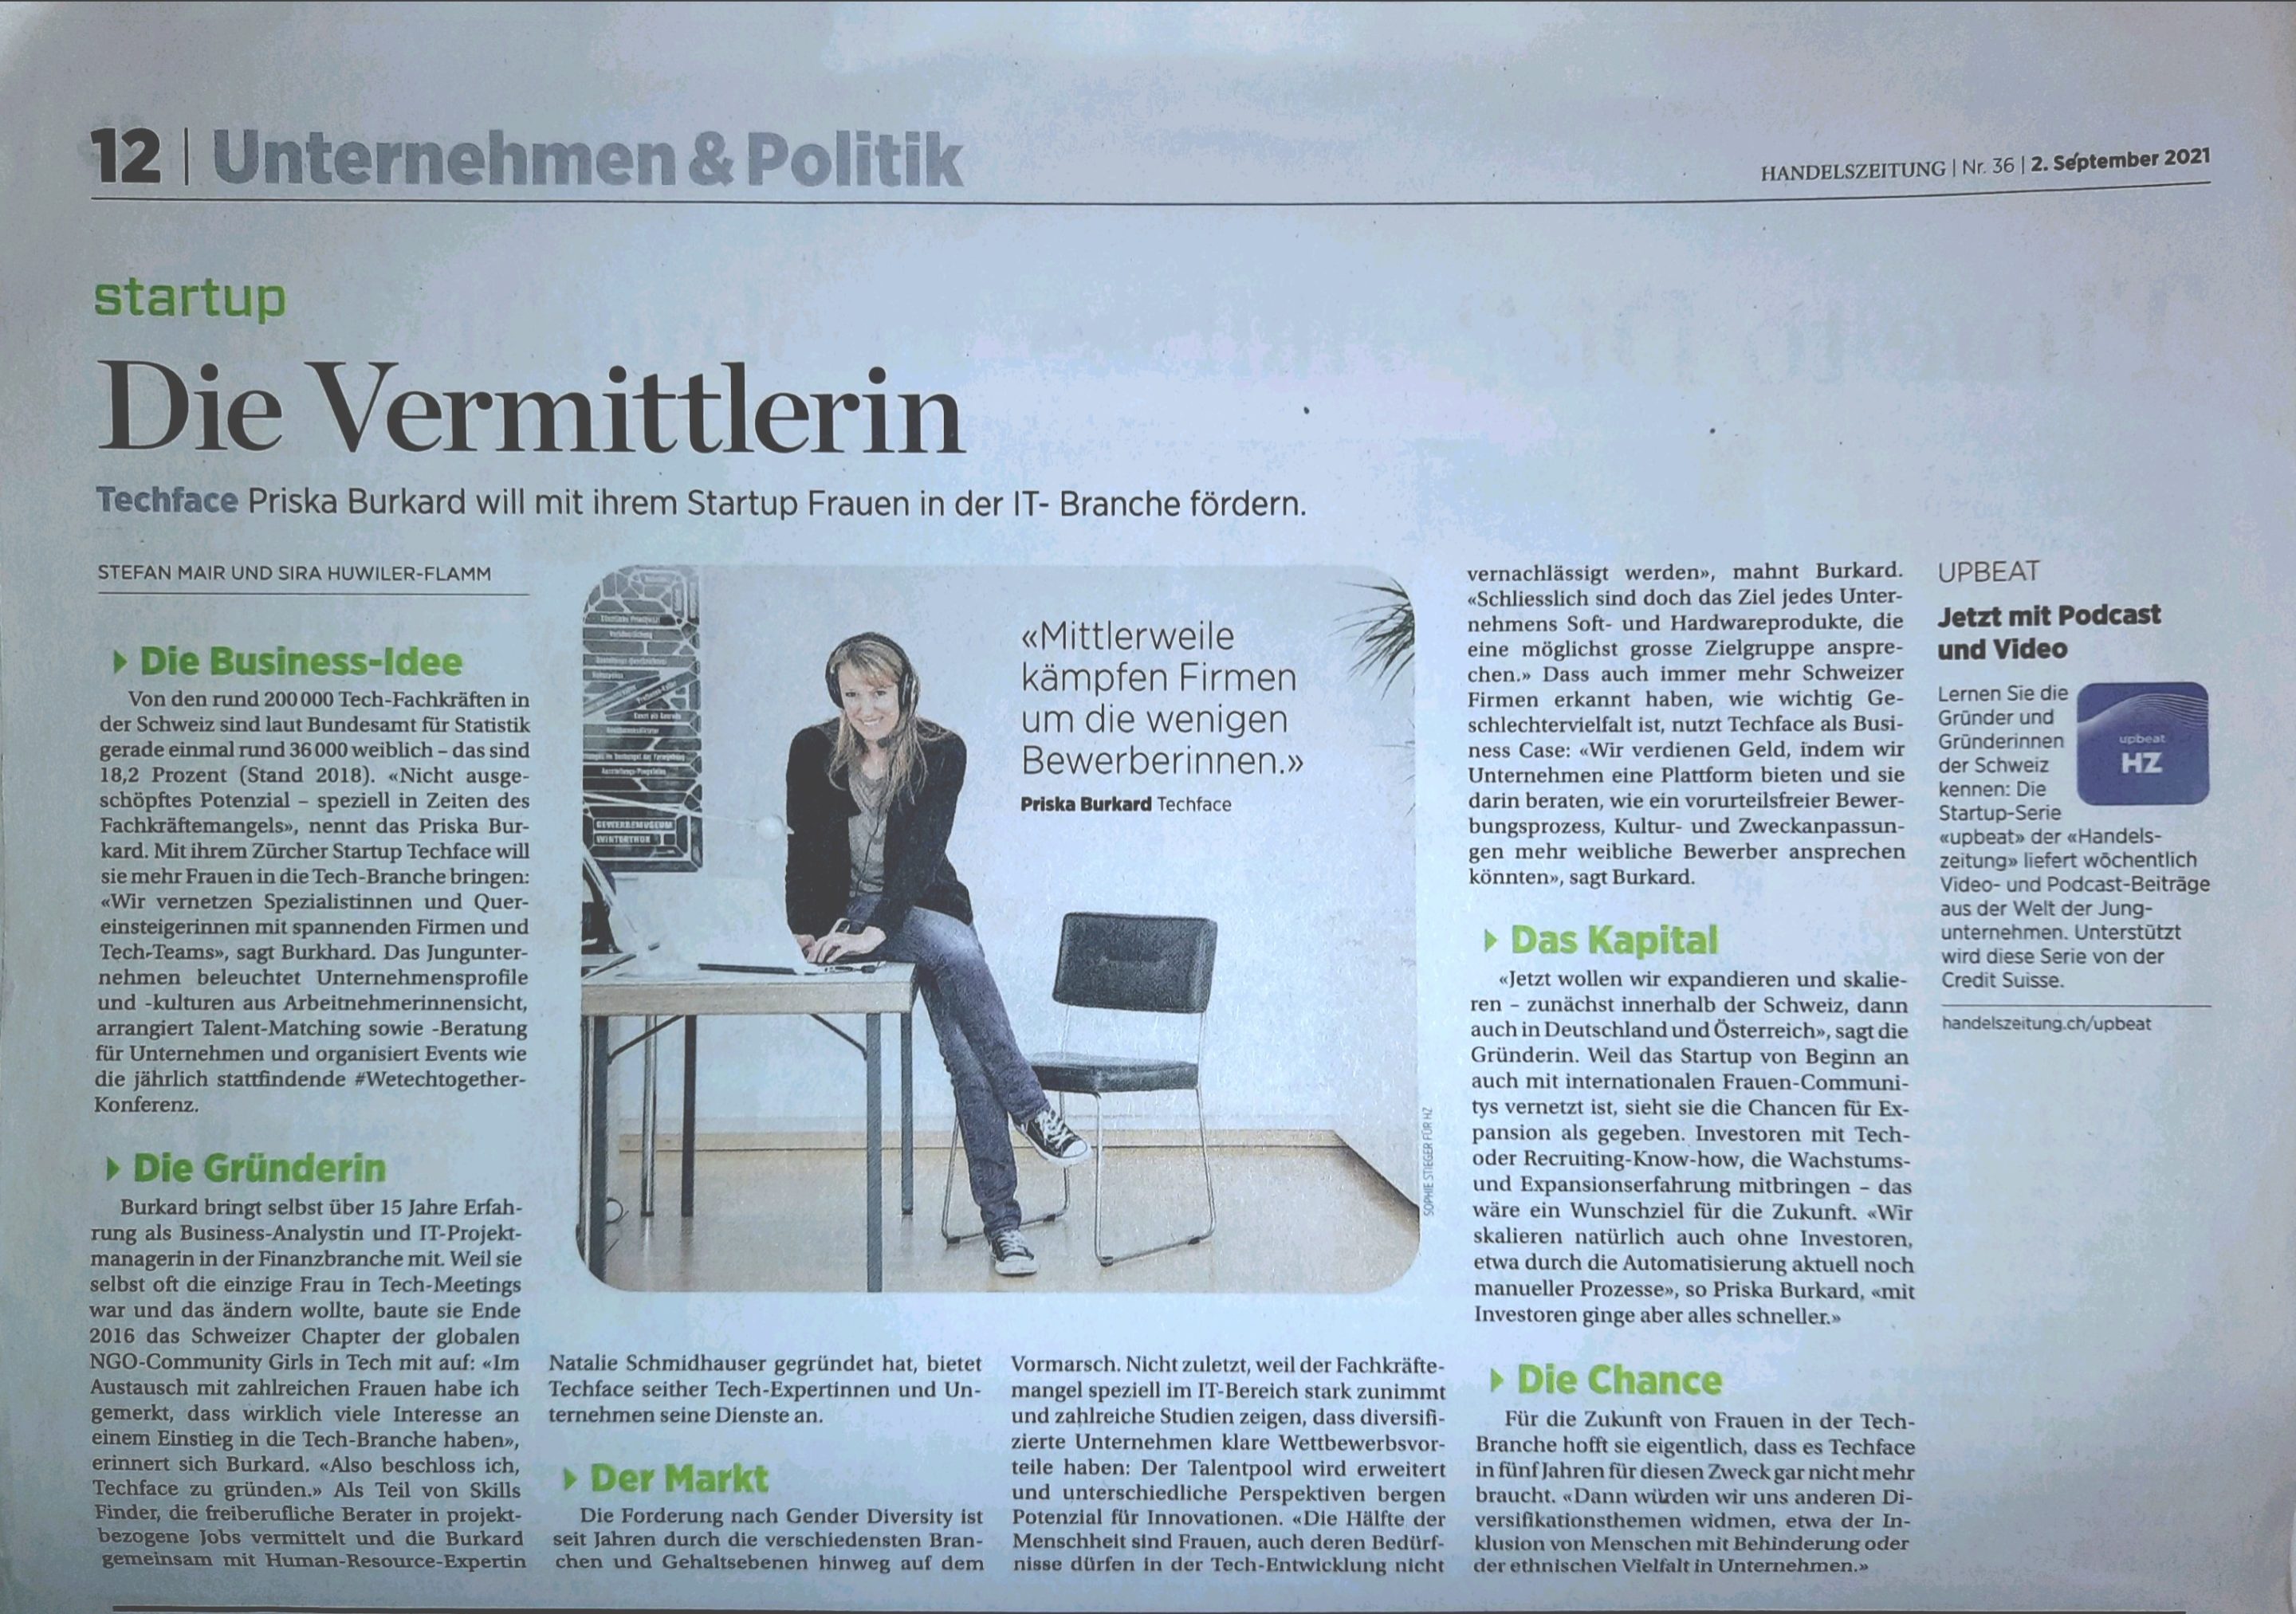 Upbeat podcast and Handelszeitung article with Priska Burkard